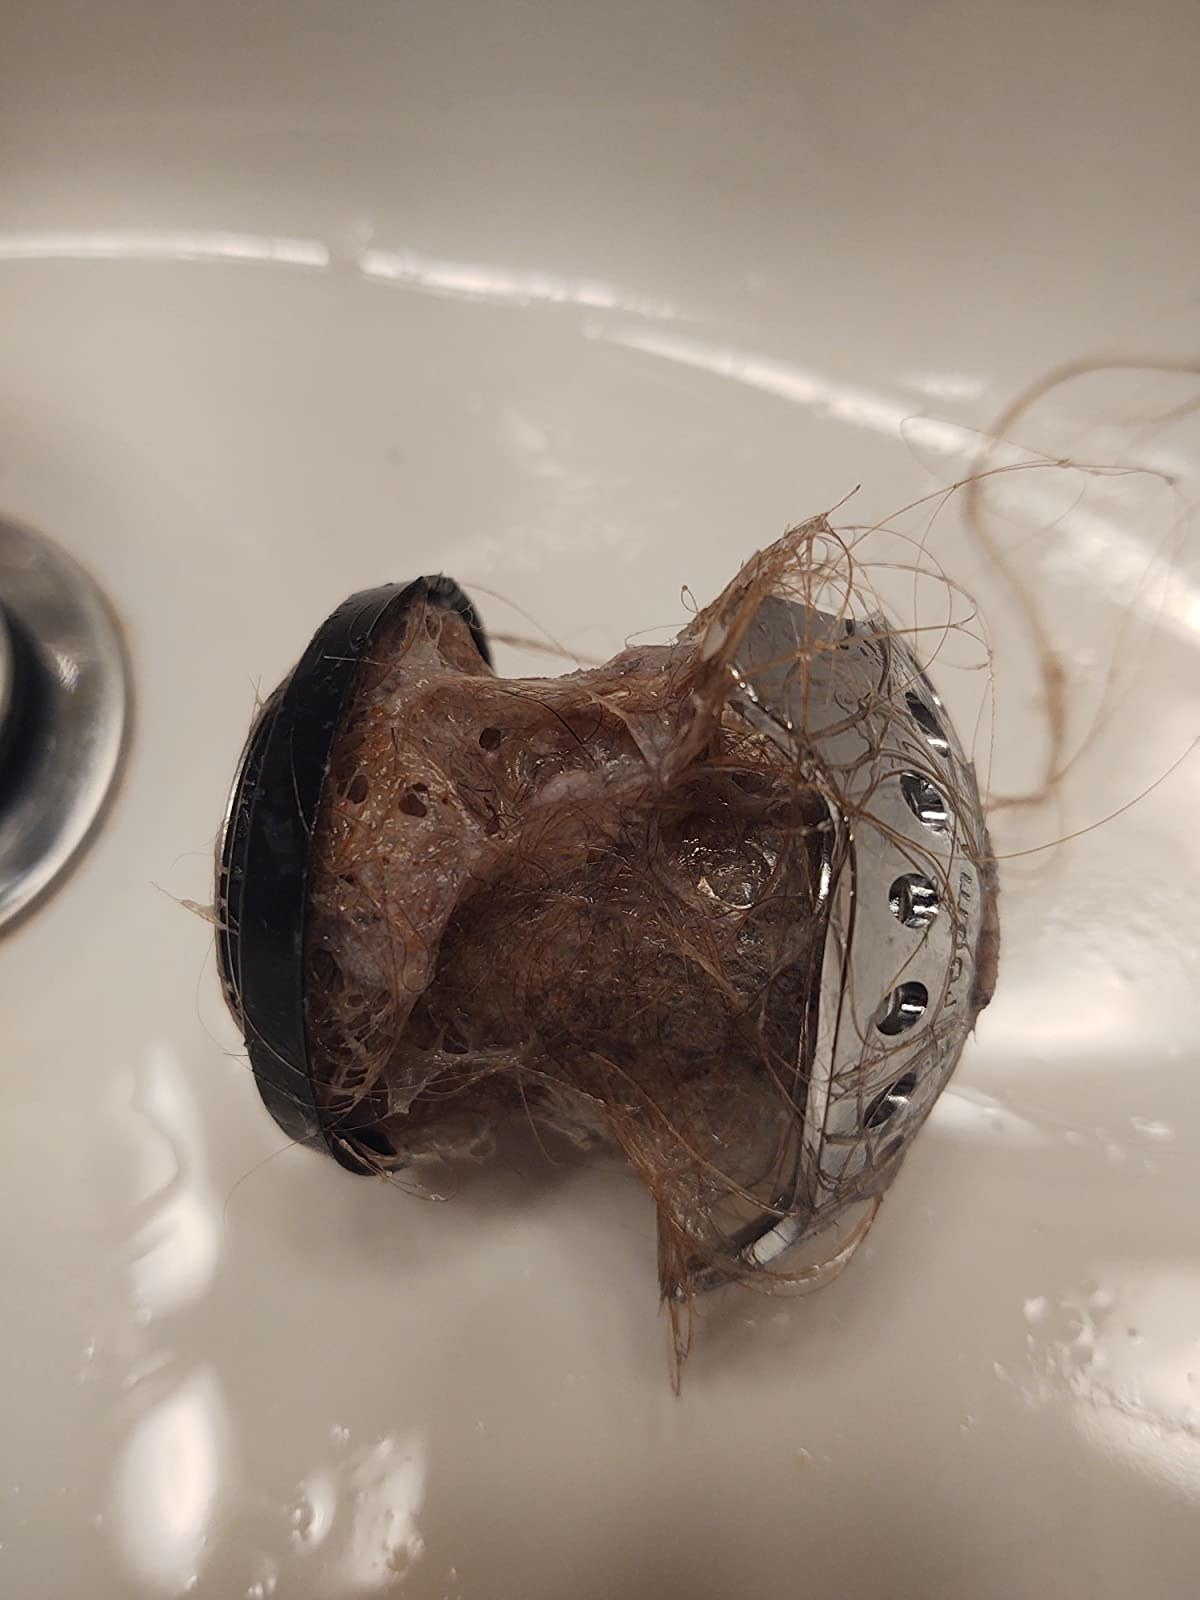 reviewer image of a stainless steel tubshroom covered in wet strands of hair